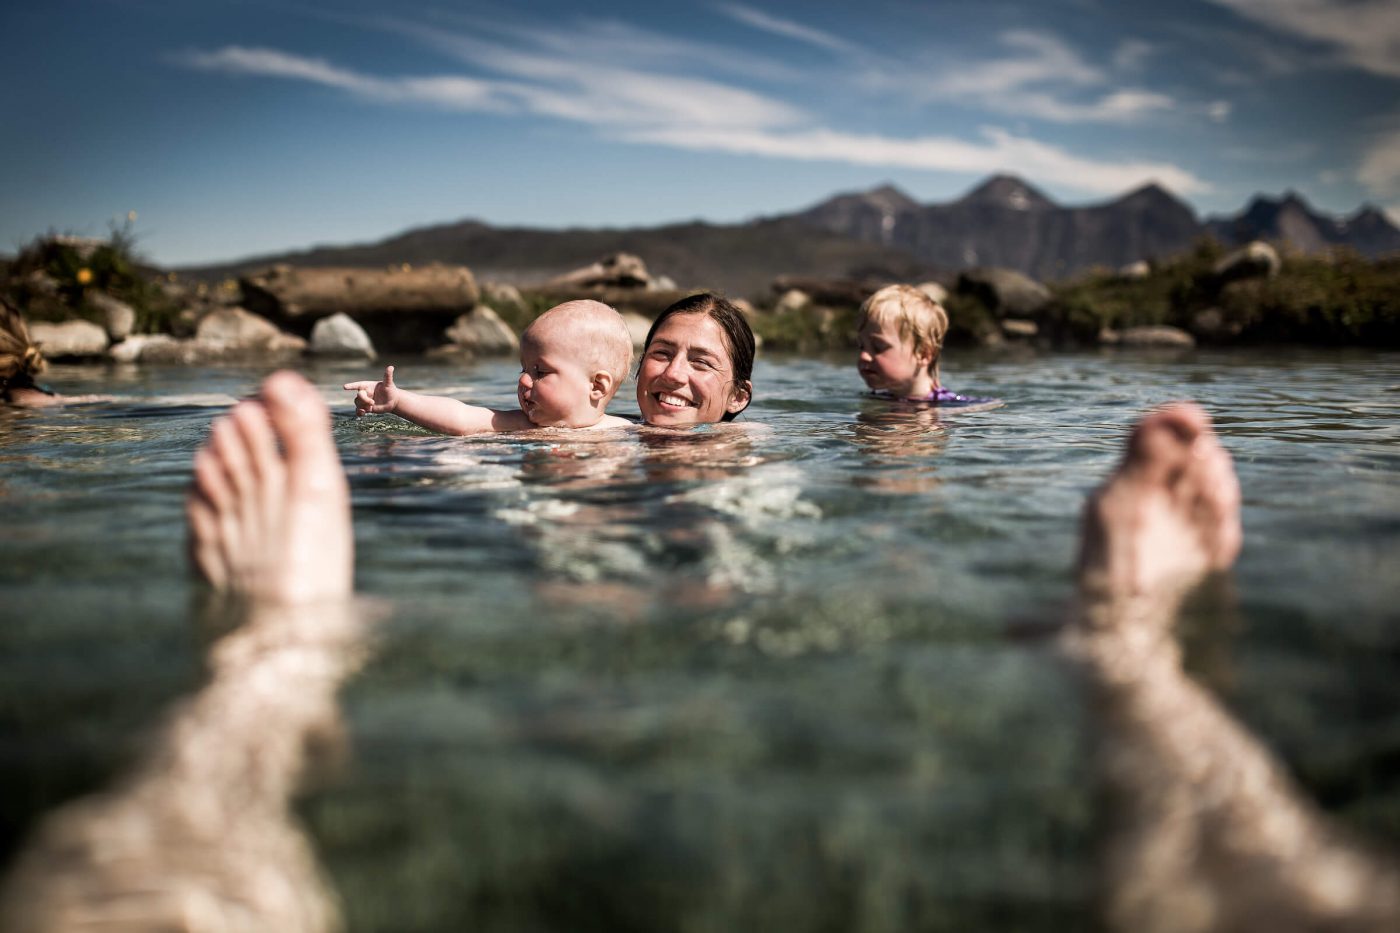 Relaxing at the hot pools of Uunartoq in South Greenland. By Mads Pihl